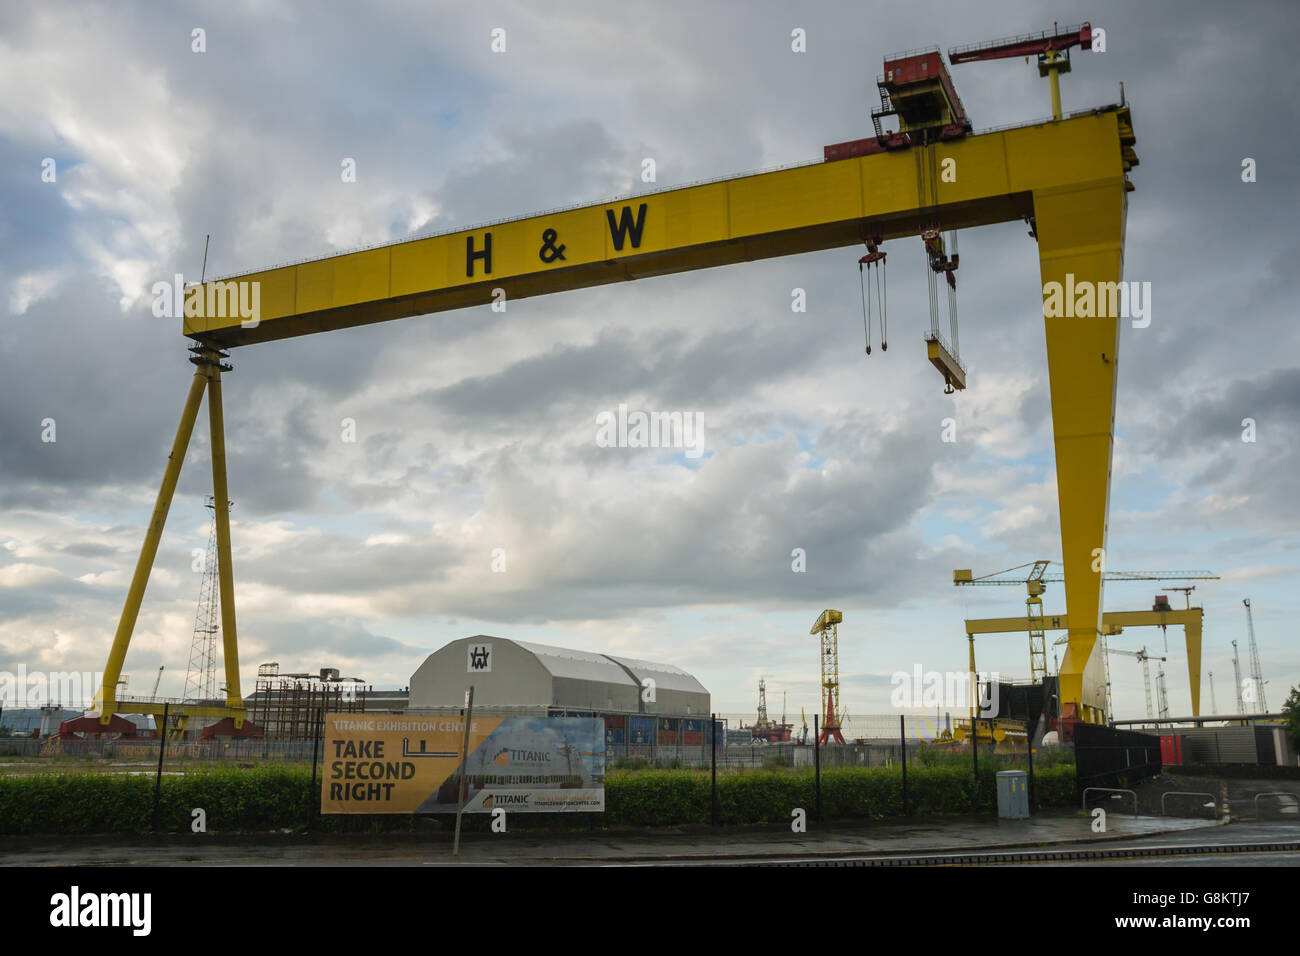 The iconic Harland & Wolff cranes Stock Photo